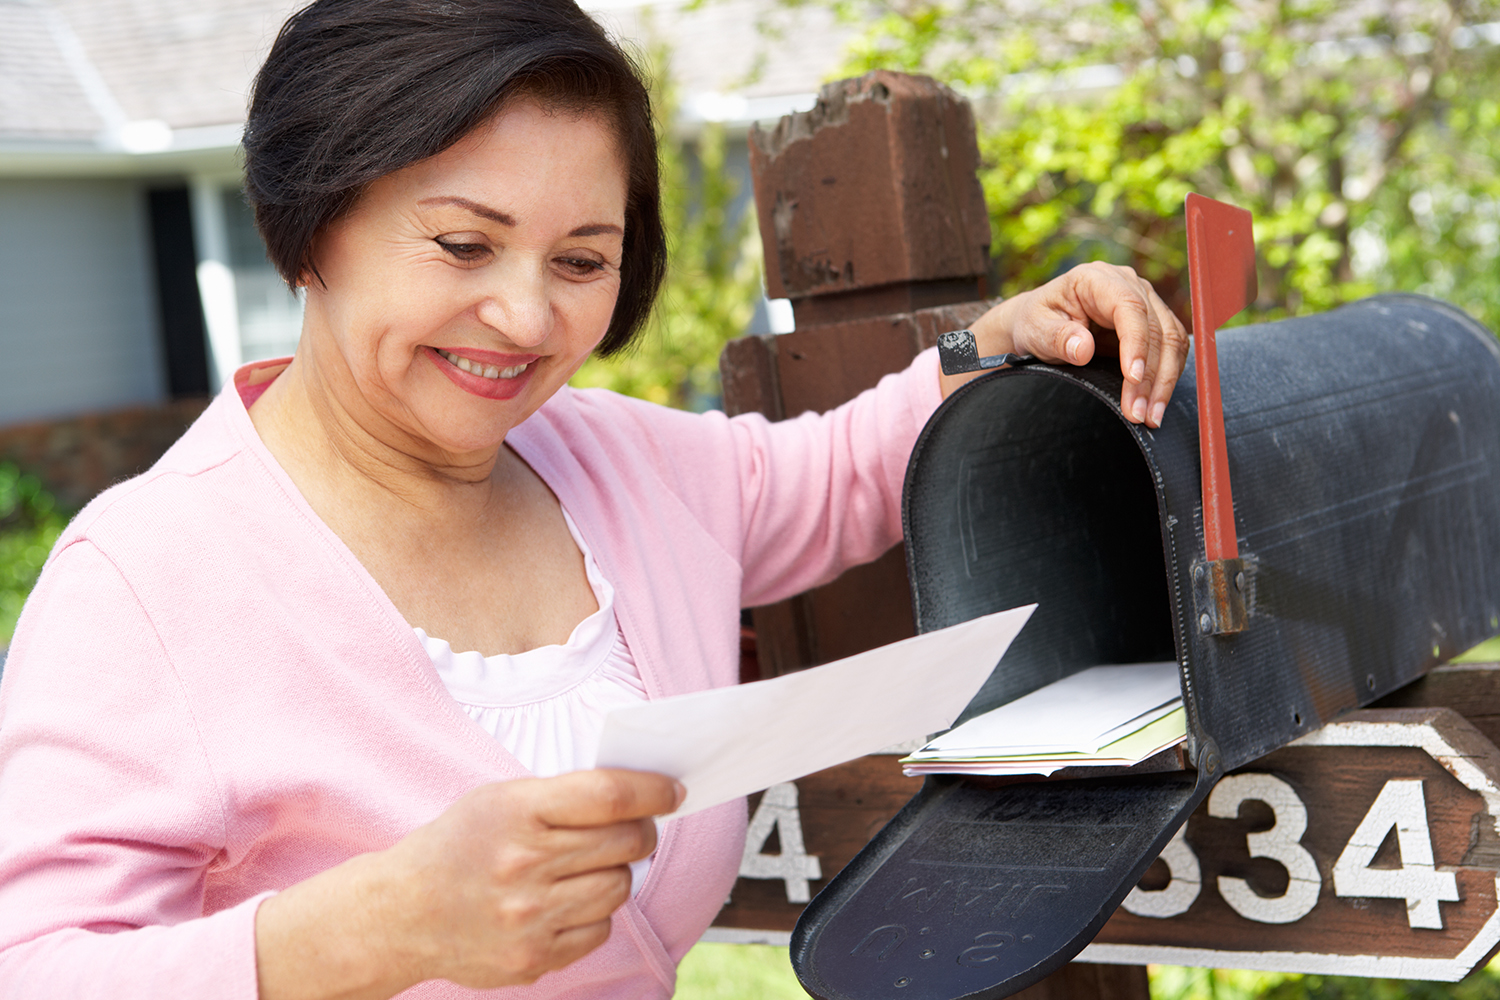 An adult woman smiles as she looks at mail while standing at her mailbox. Individuals from all generations appreciate the value, convenience and personal touch of direct mail.